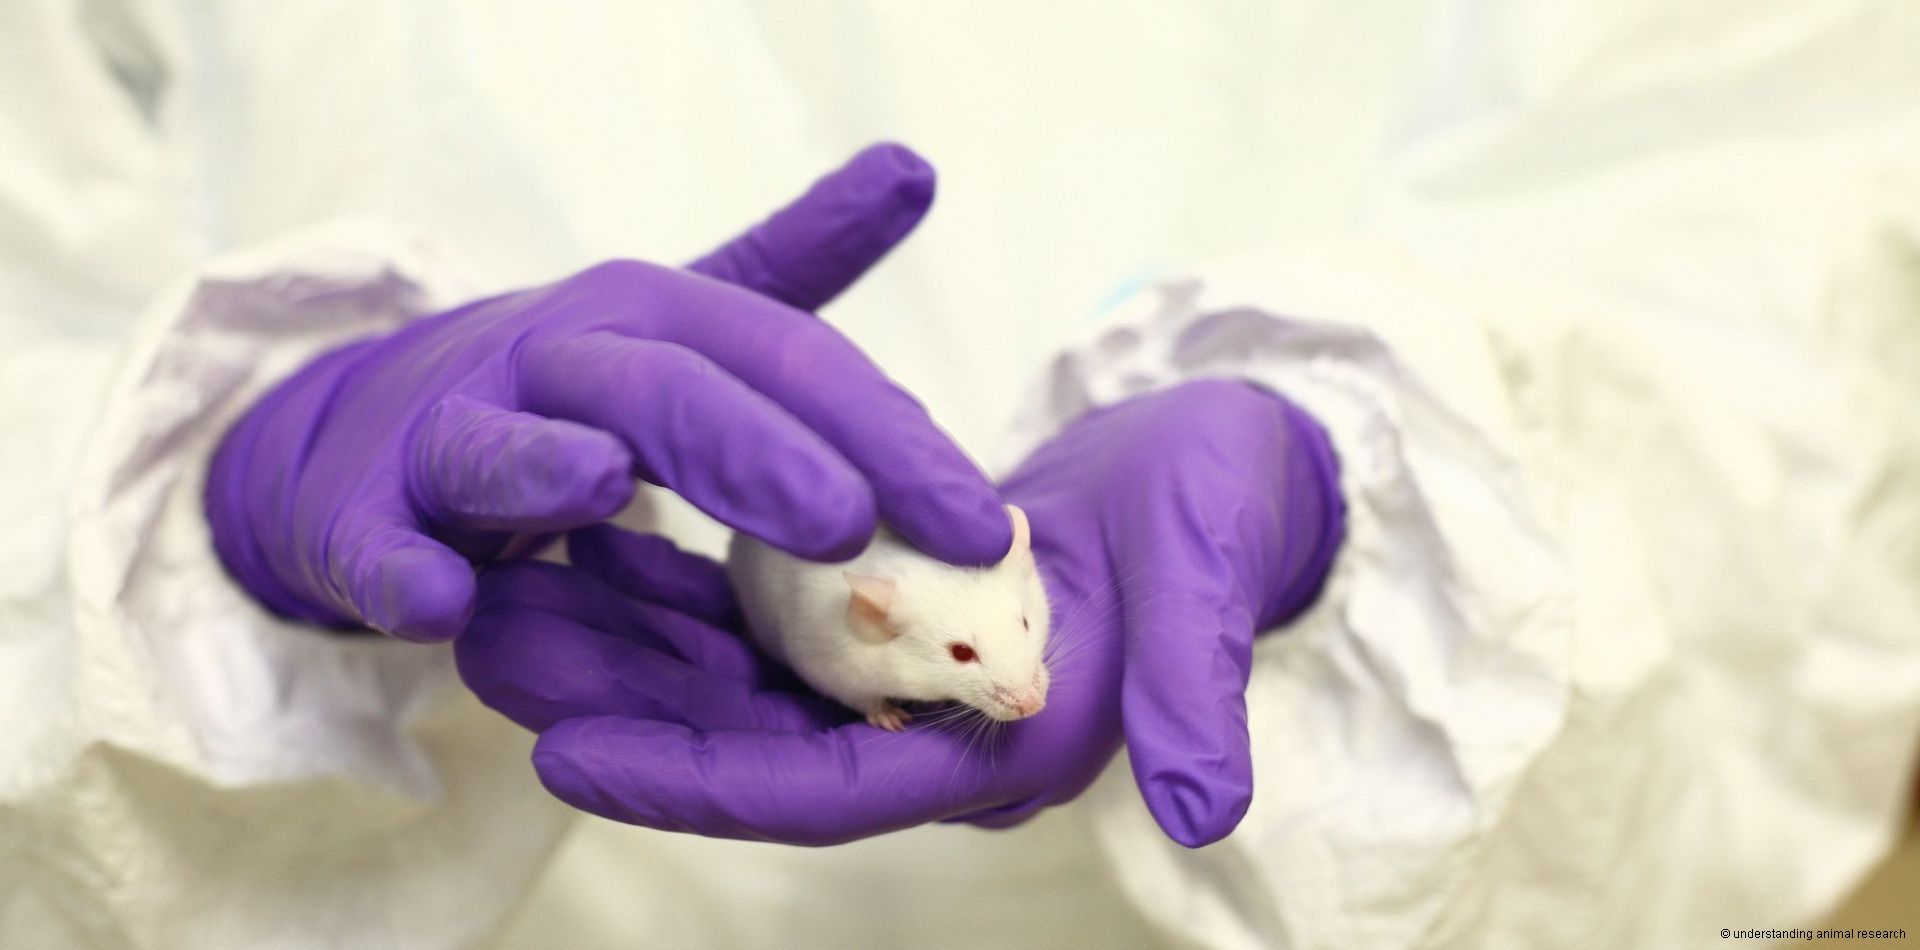 white-mouse-in-purple-gloved-hands_3 c understanding_animal_research.jpg